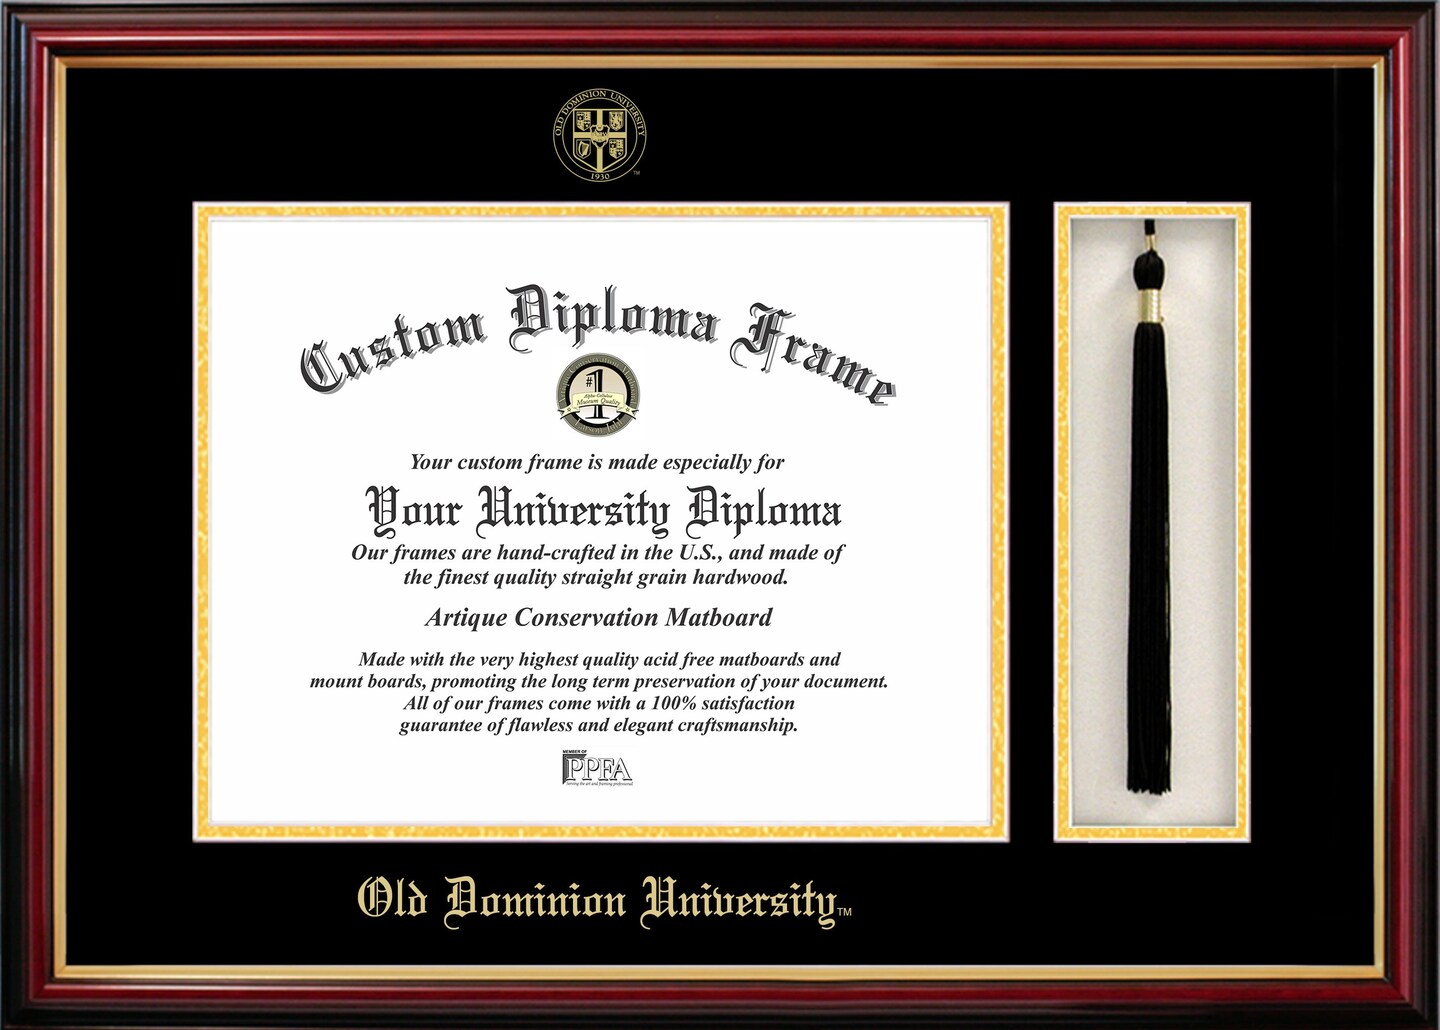 Old Dominion 14w x 11h Tassel Box and Diploma Frame